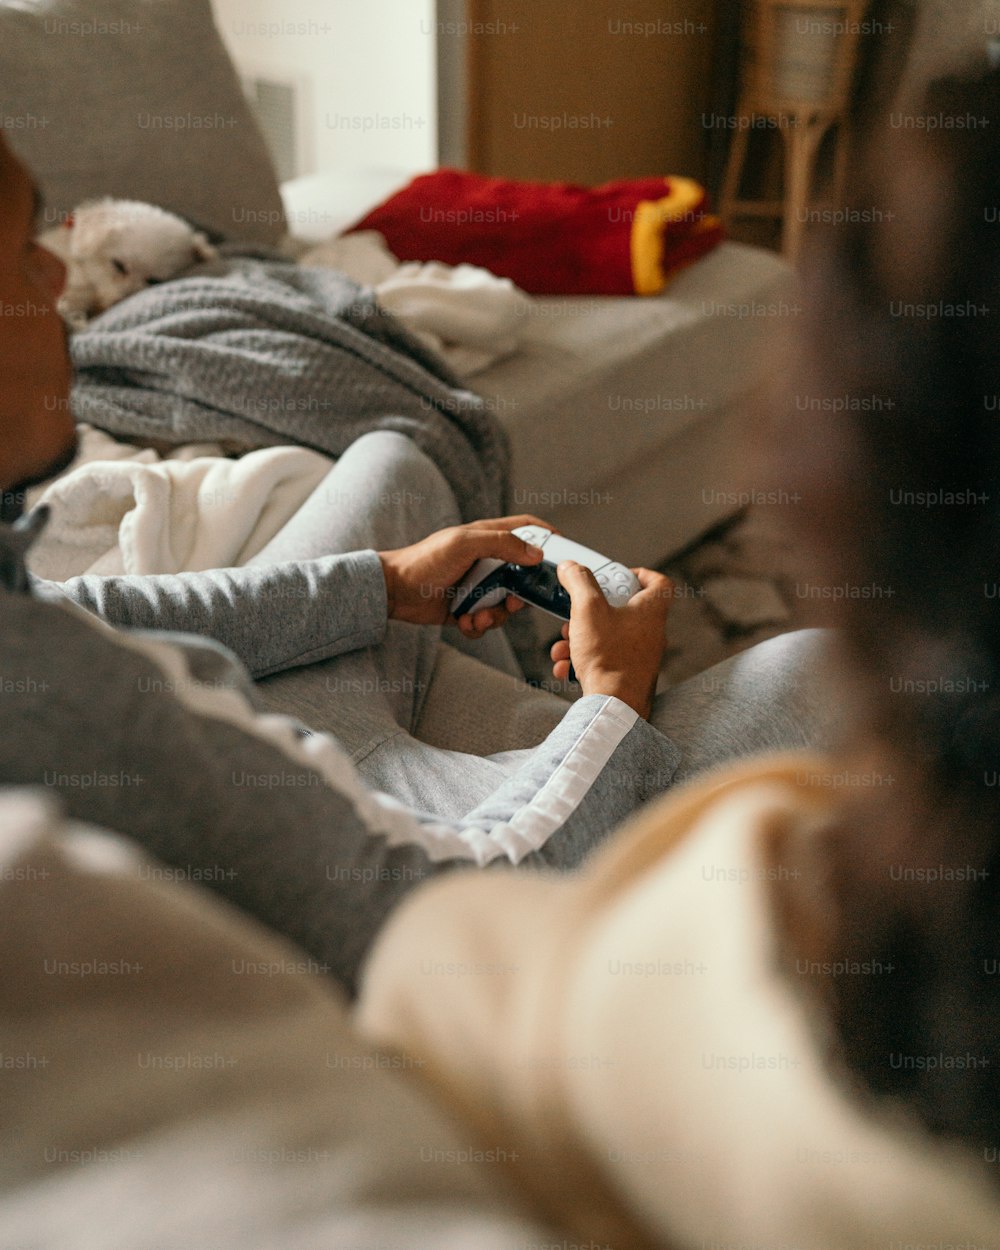 a woman sitting on a couch holding a nintendo wii game controller